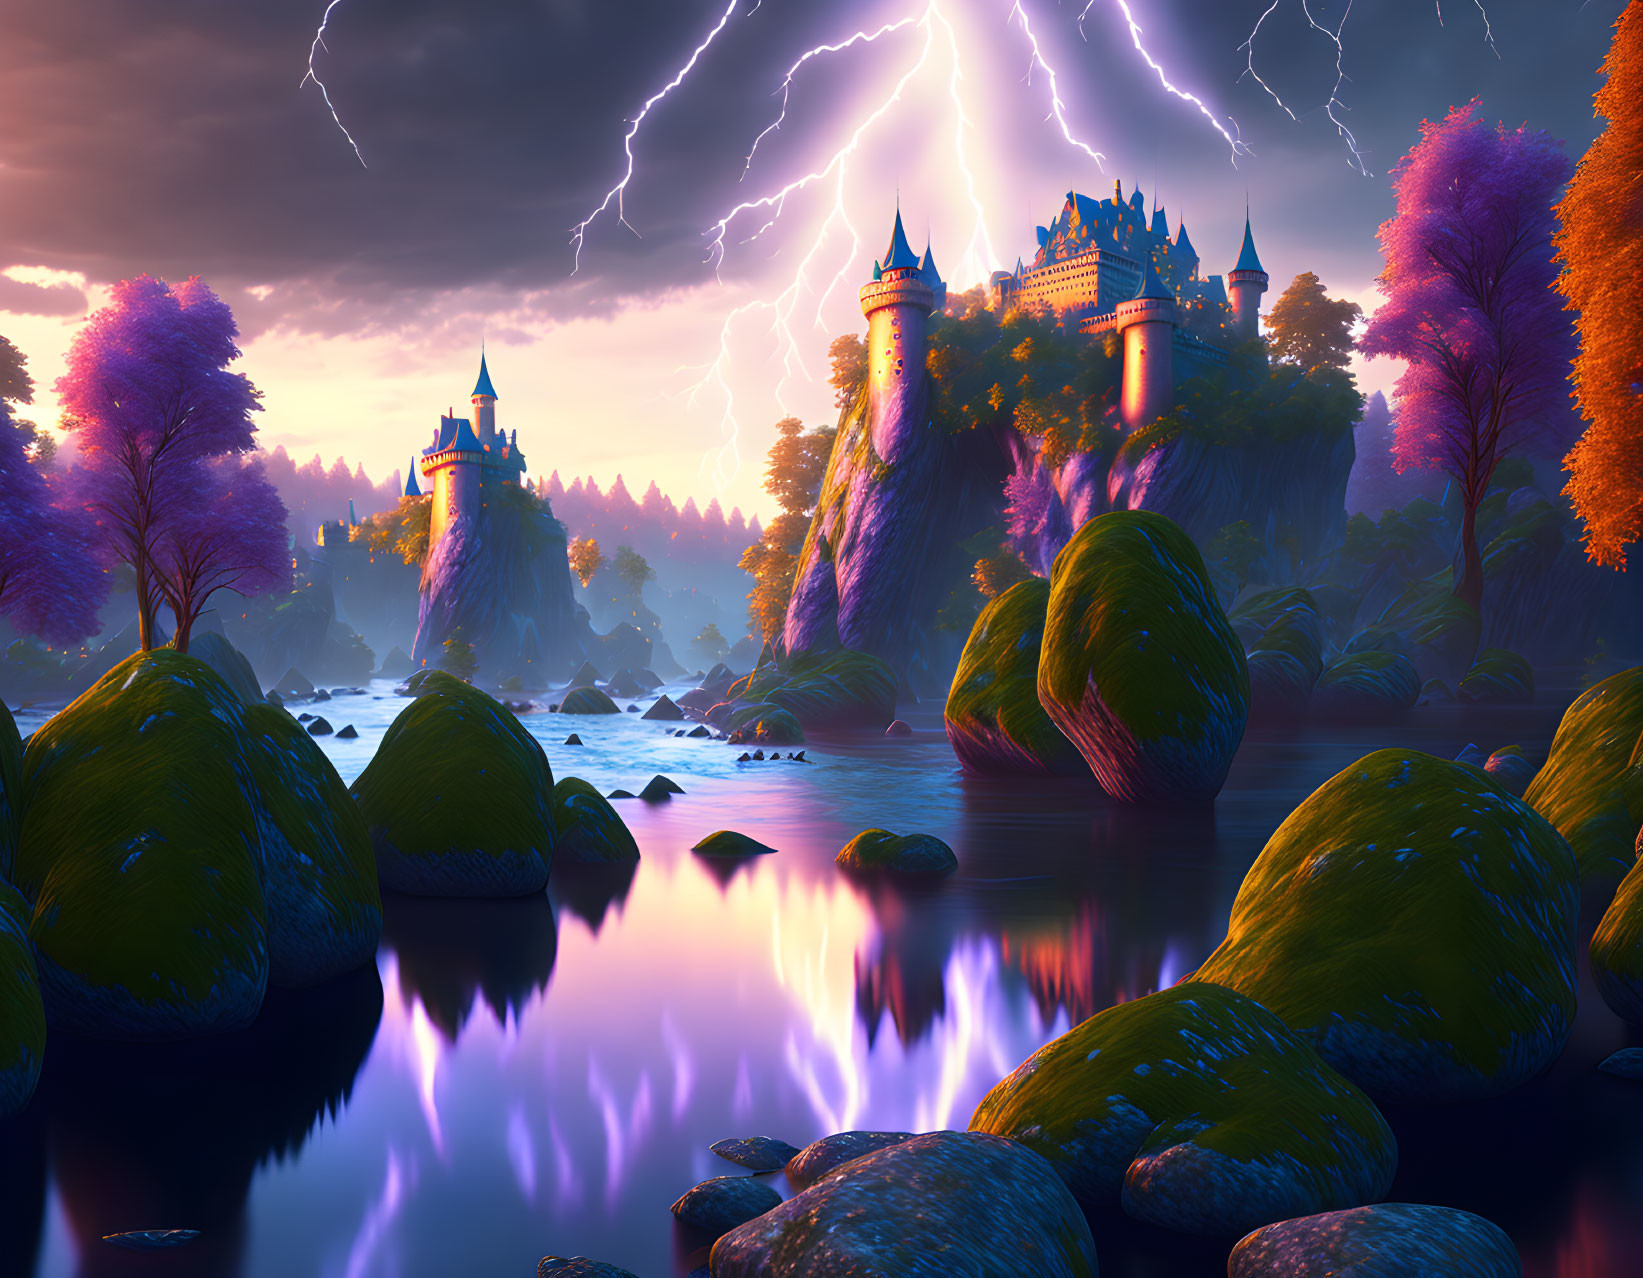 Fantasy landscape with purple hues, two castles, reflective river, and lightning sky